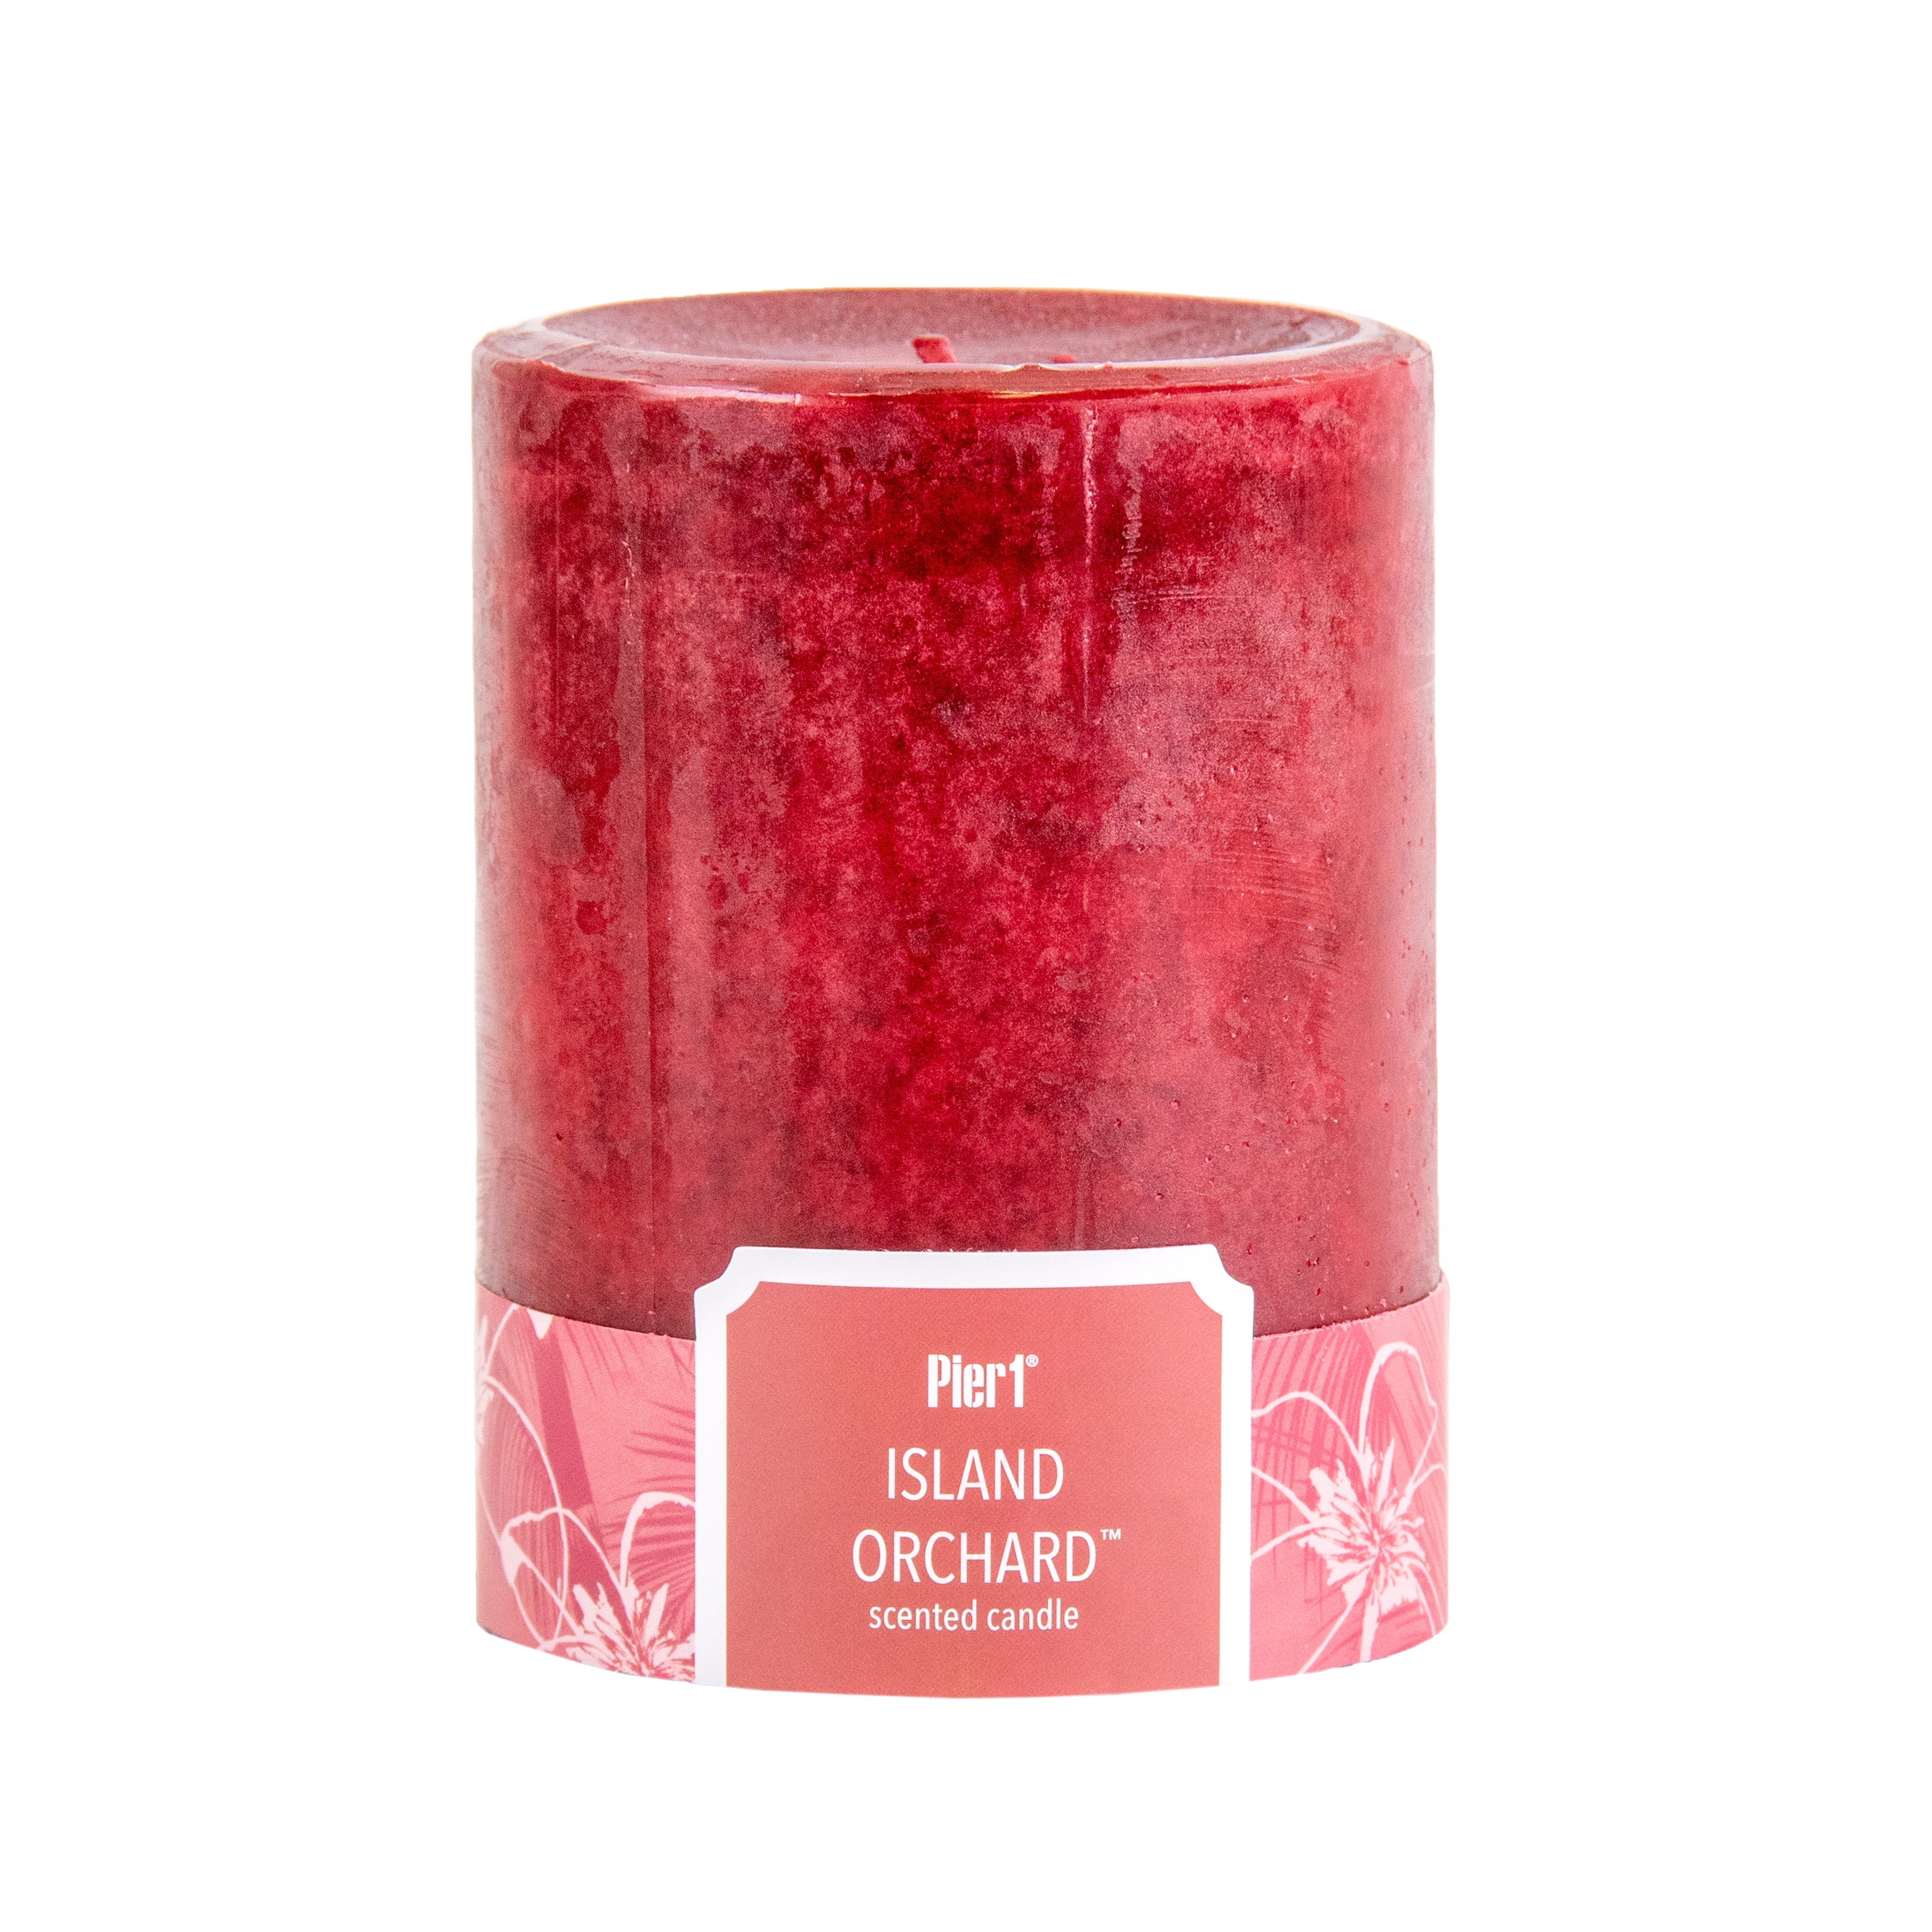 Pier-1-Island-Orchard-Mottled-3x4-Pillar-Candle-Candles